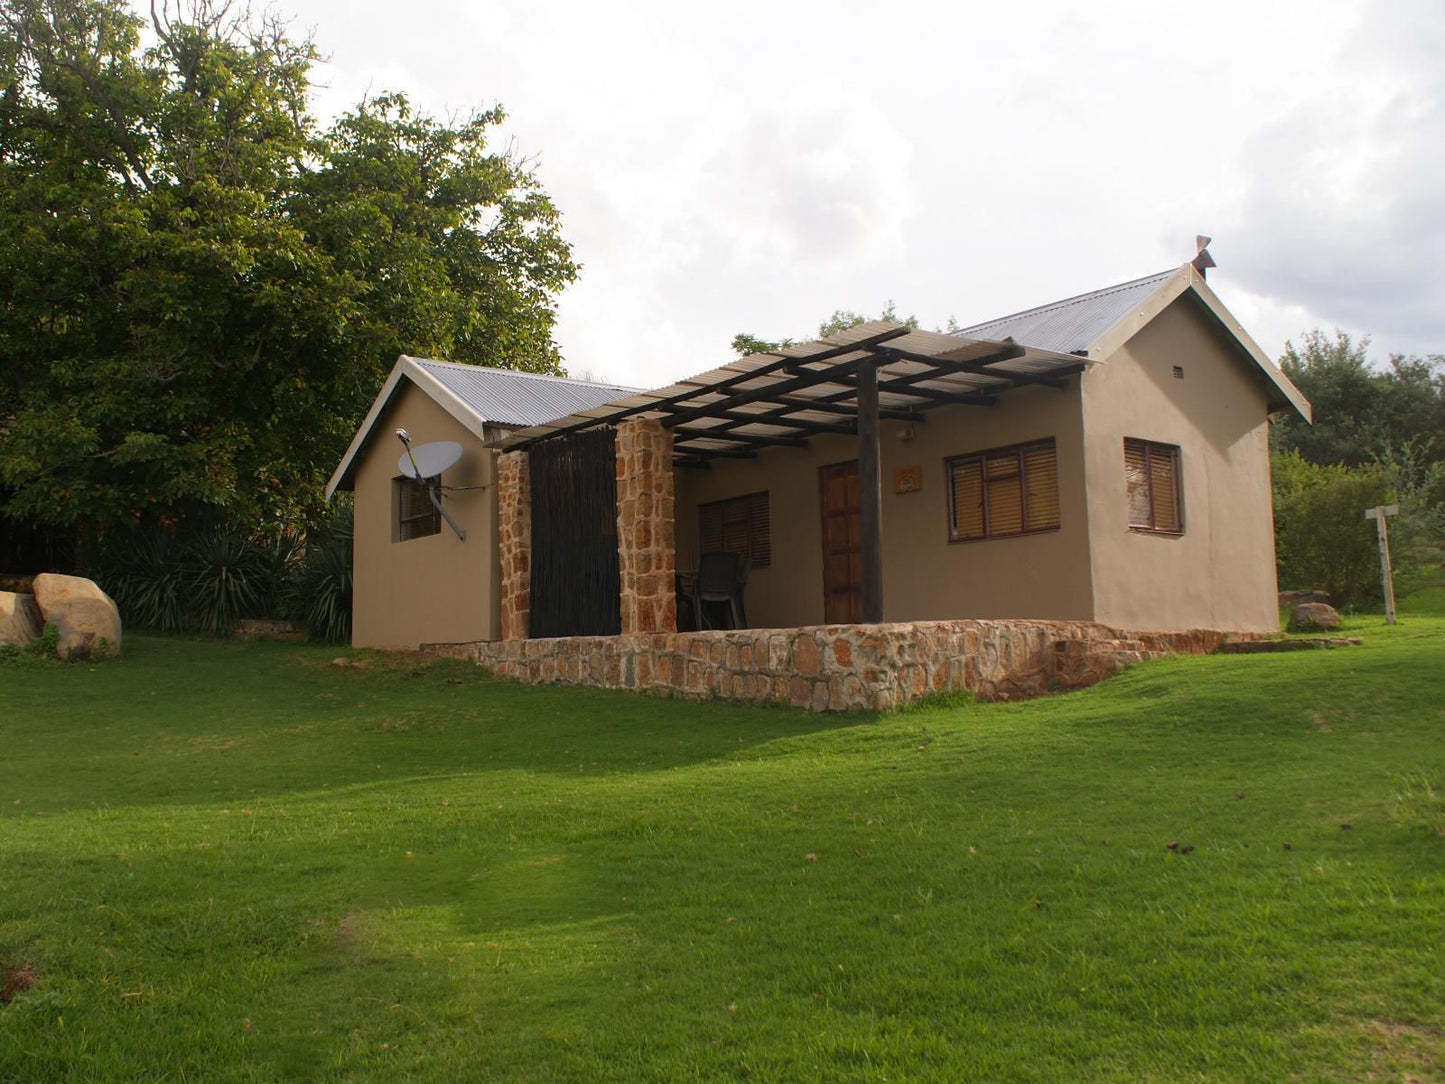 Riverman Cabin Dullstroom Mpumalanga South Africa House, Building, Architecture